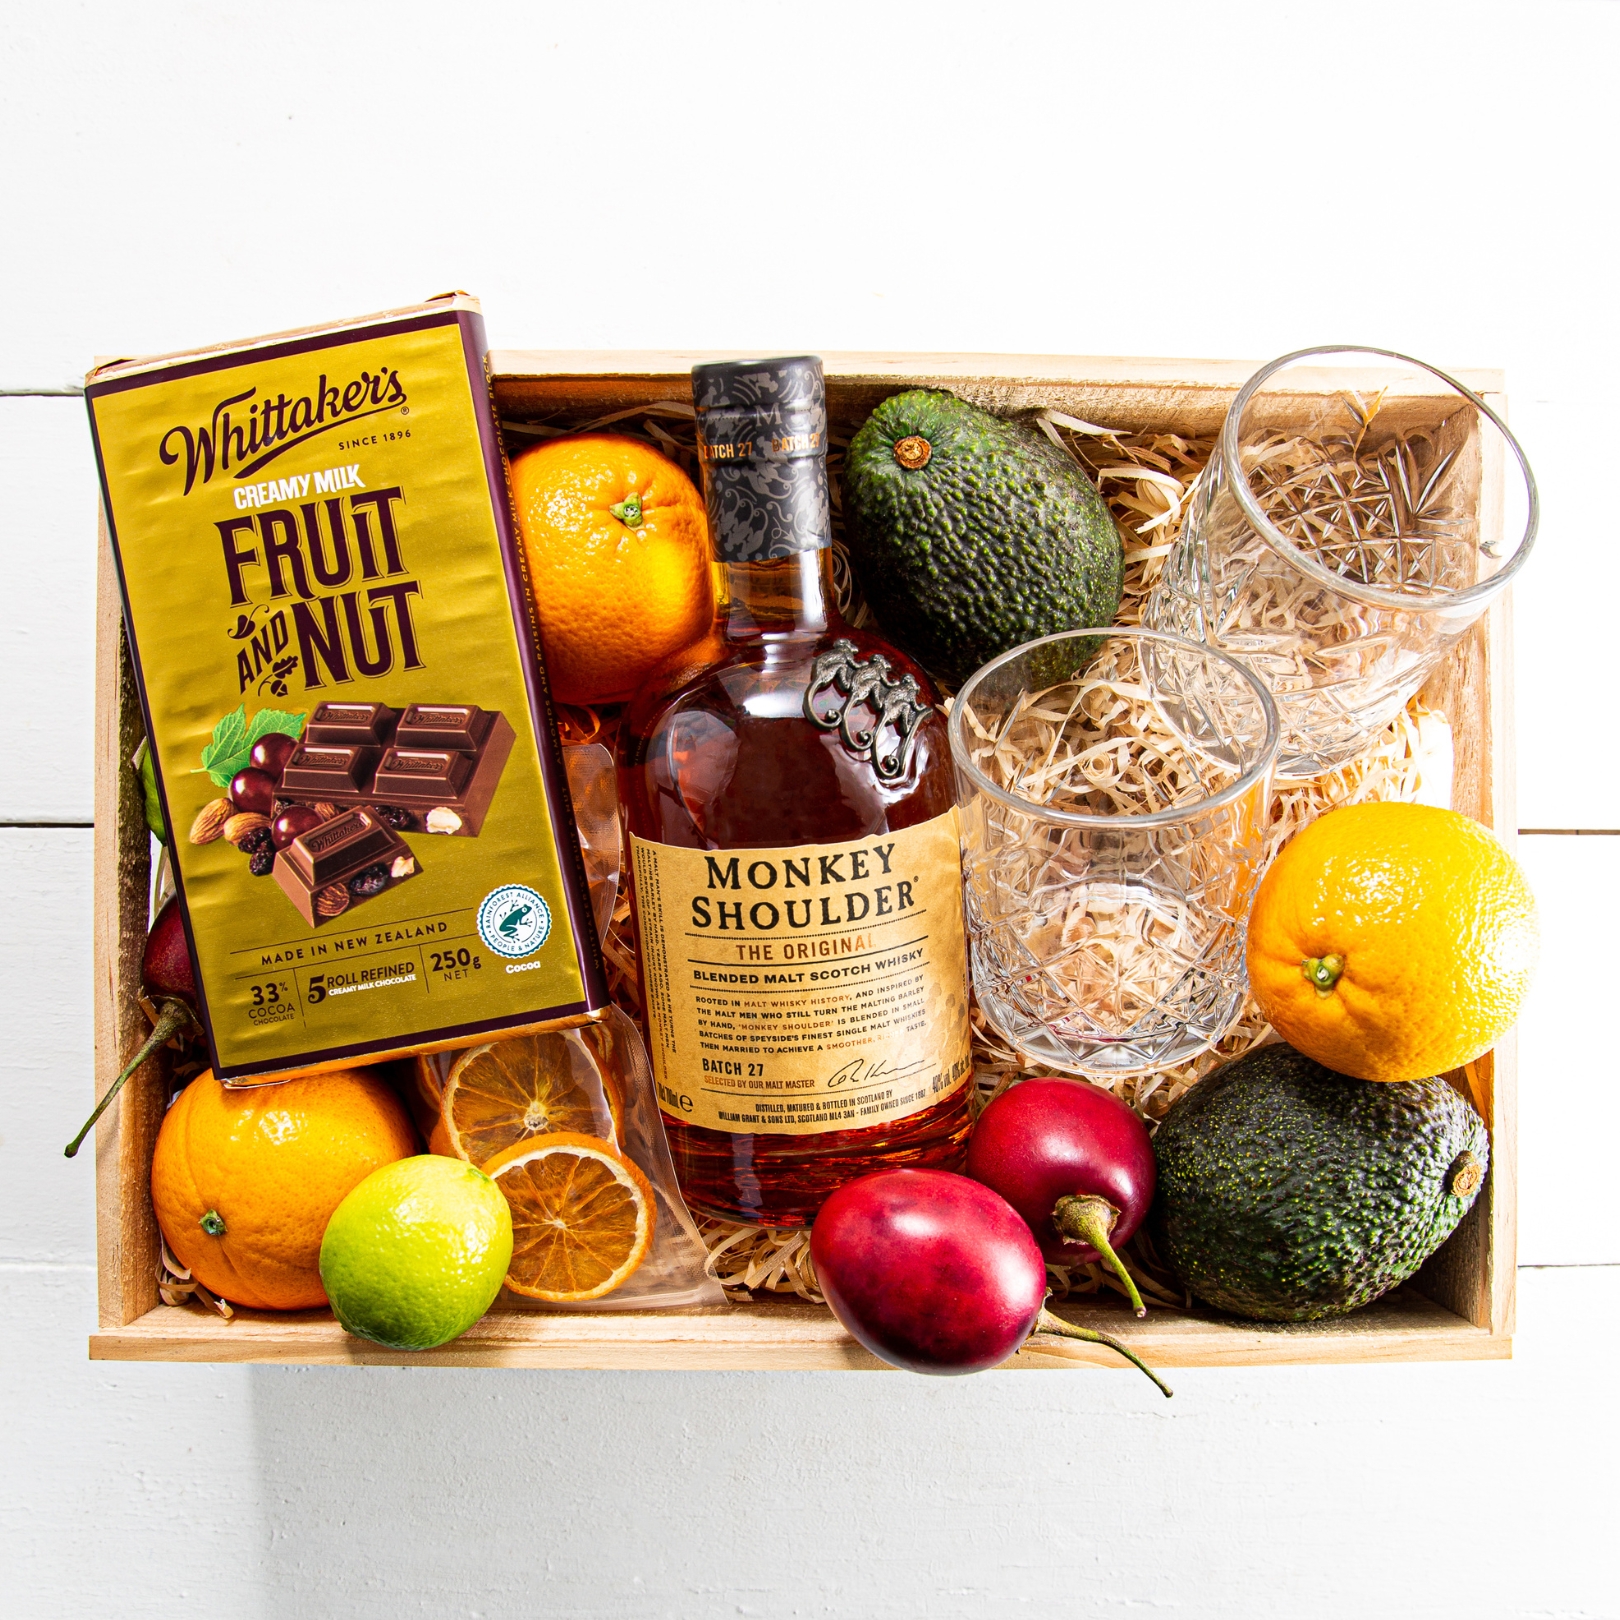 Buy The Whiskey Lover - Whiskey, Chocolate & Fruit Gift Box Online NZ